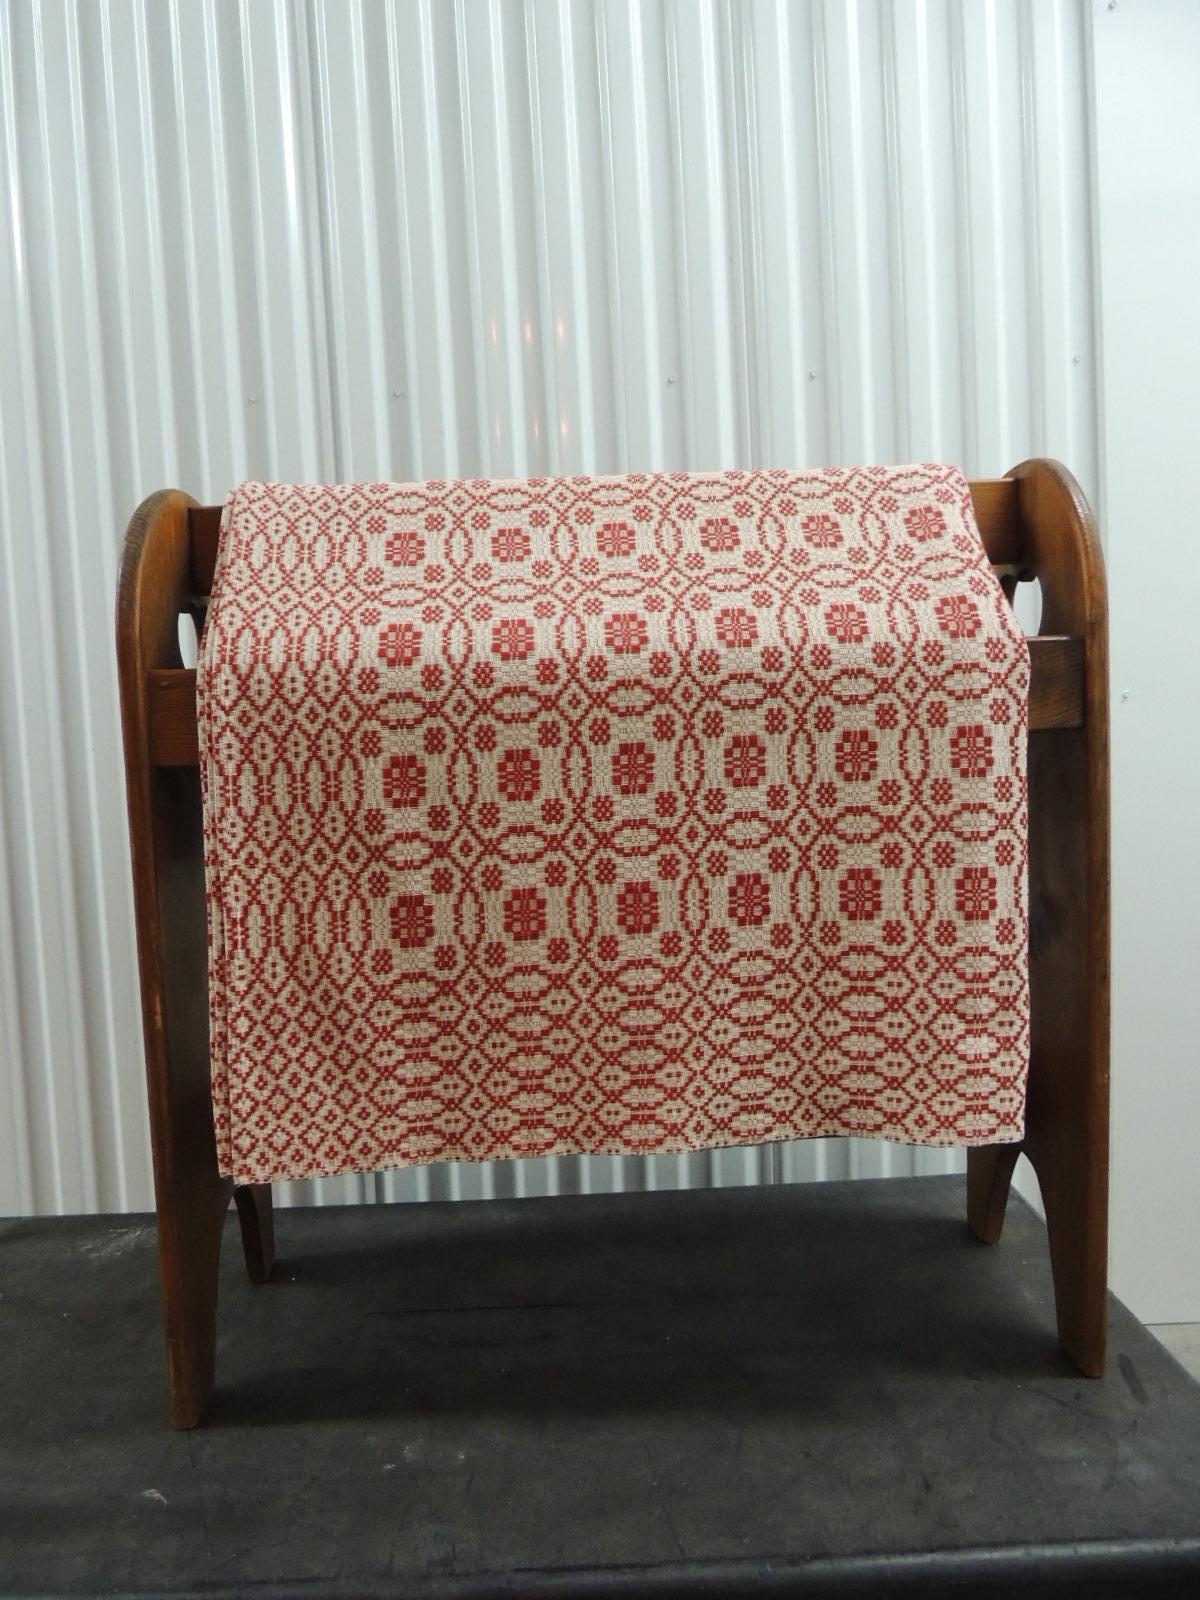 Wool Red and White Americana Jacquard Woven Blanket/Coverlet